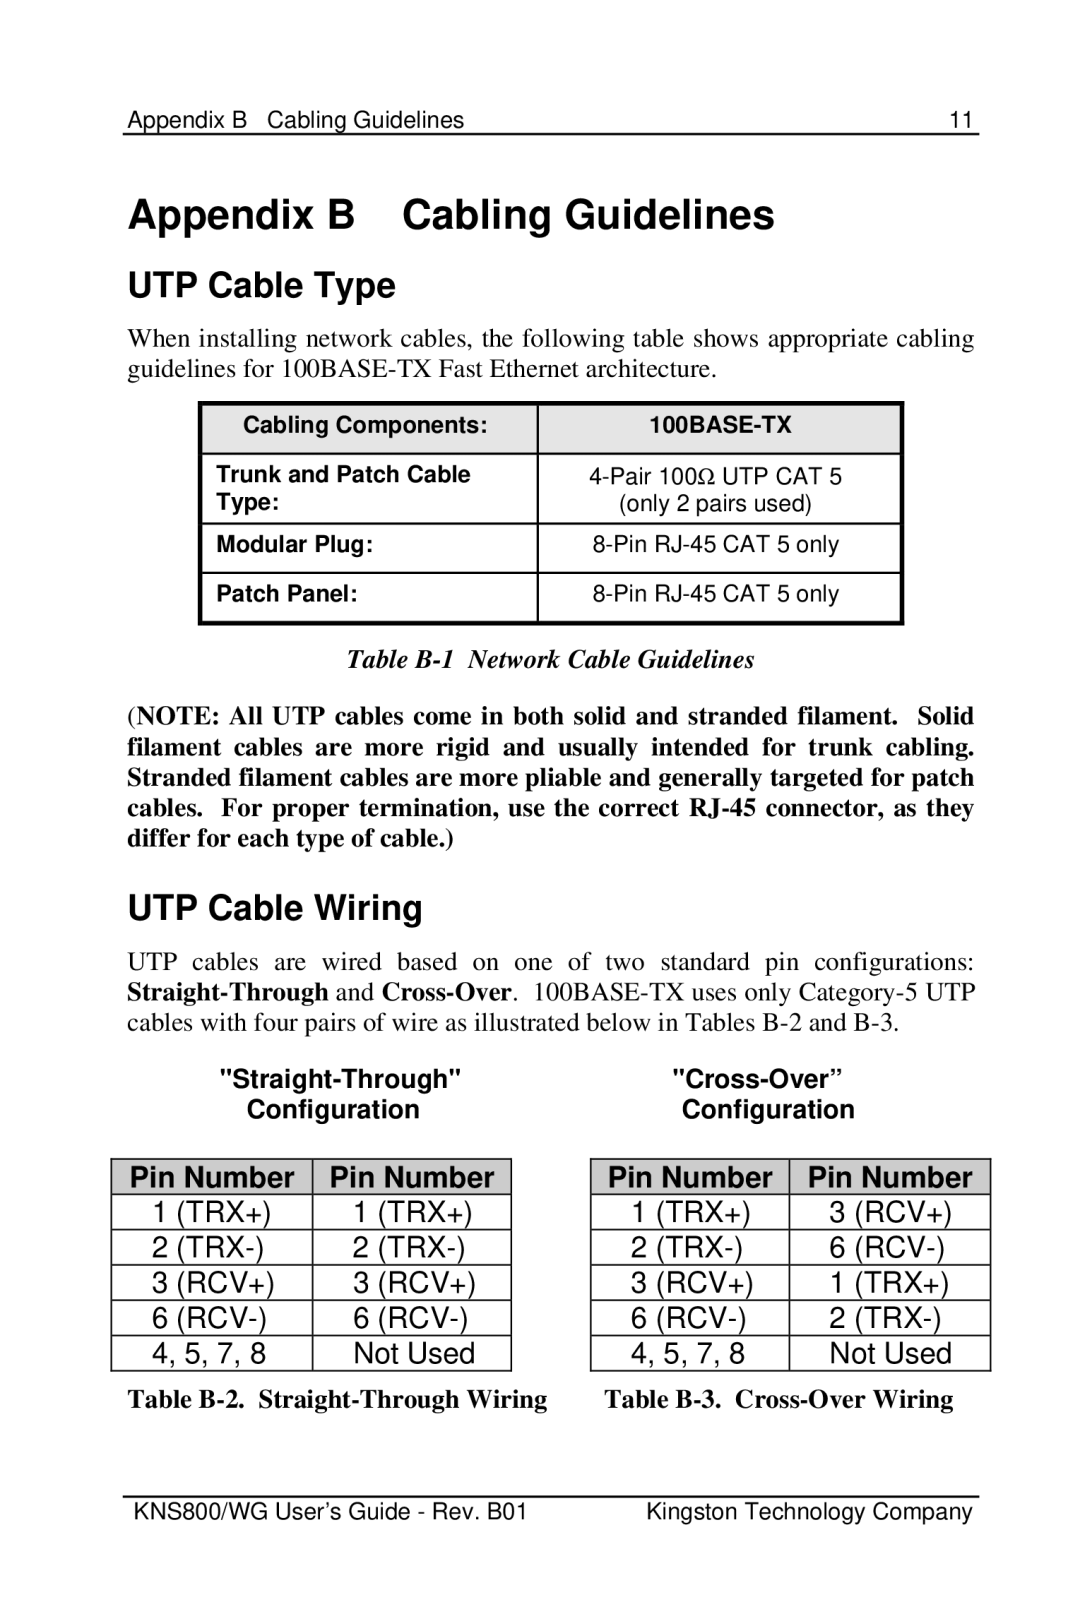 Kingston Technology KNS500/WG, KNS800/WG manual Appendix B Cabling Guidelines, UTP Cable Type, UTP Cable Wiring, Pin Number 